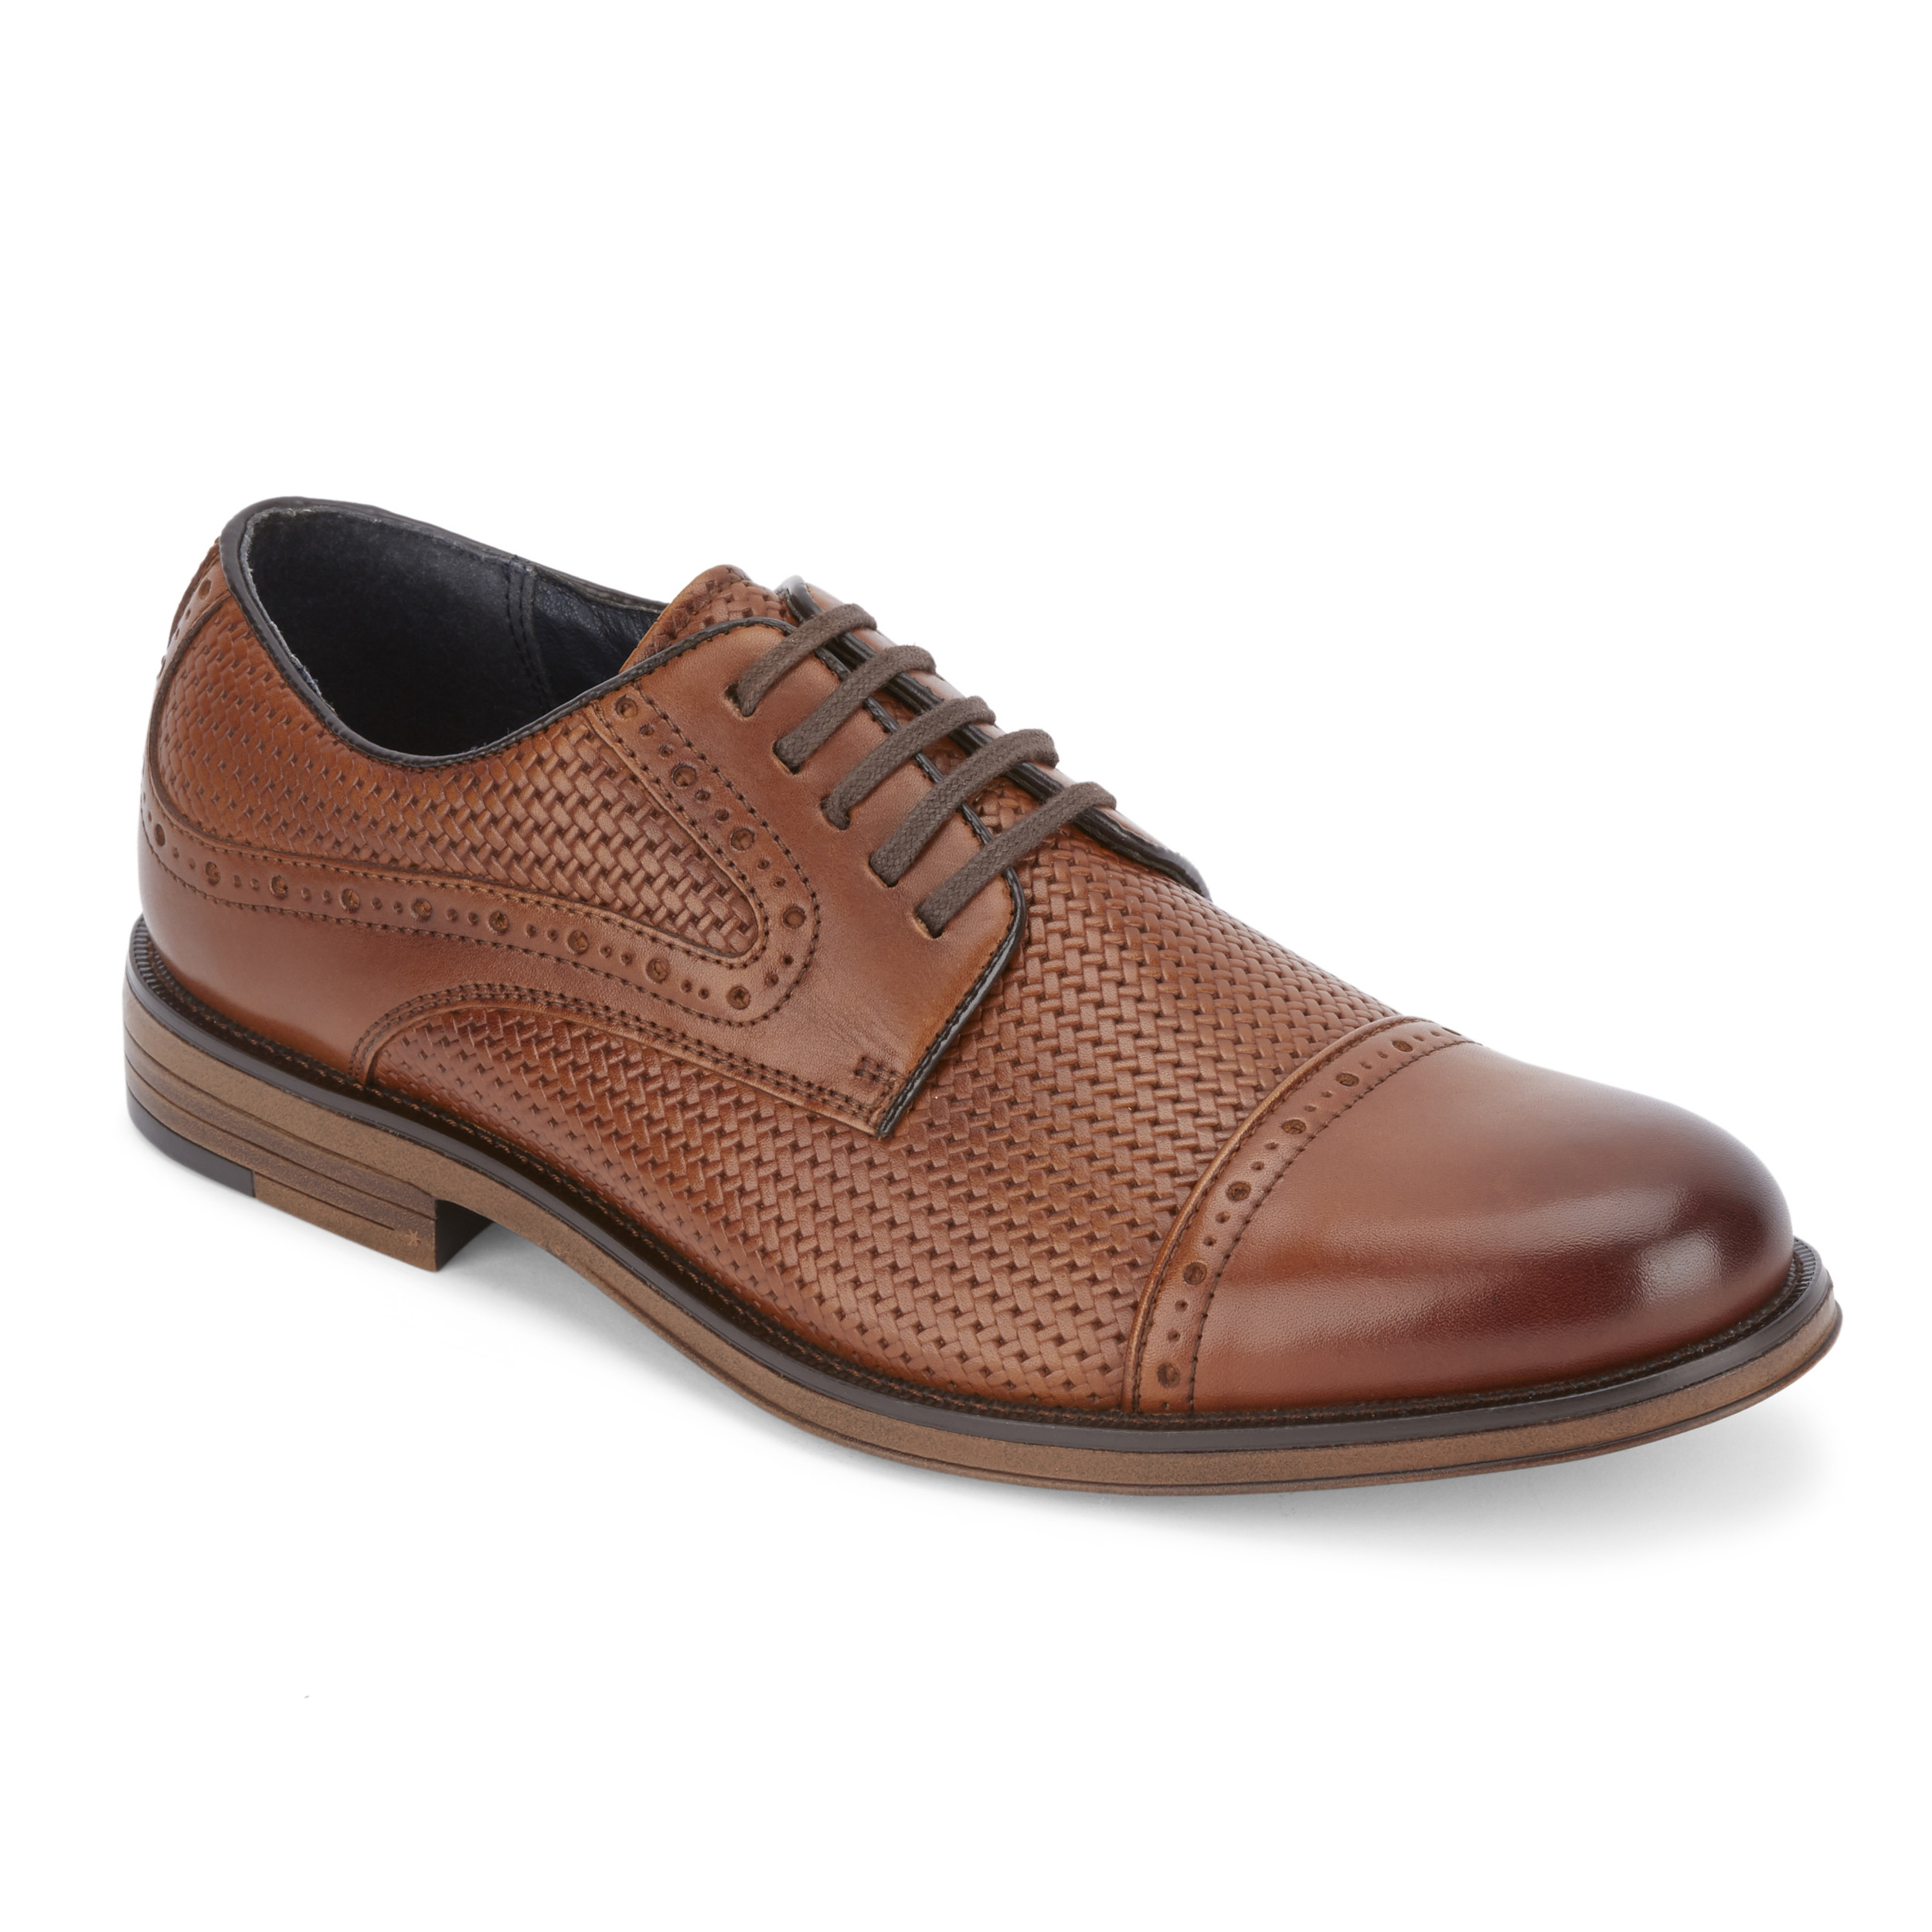 Dockers Shoes: 62% Off